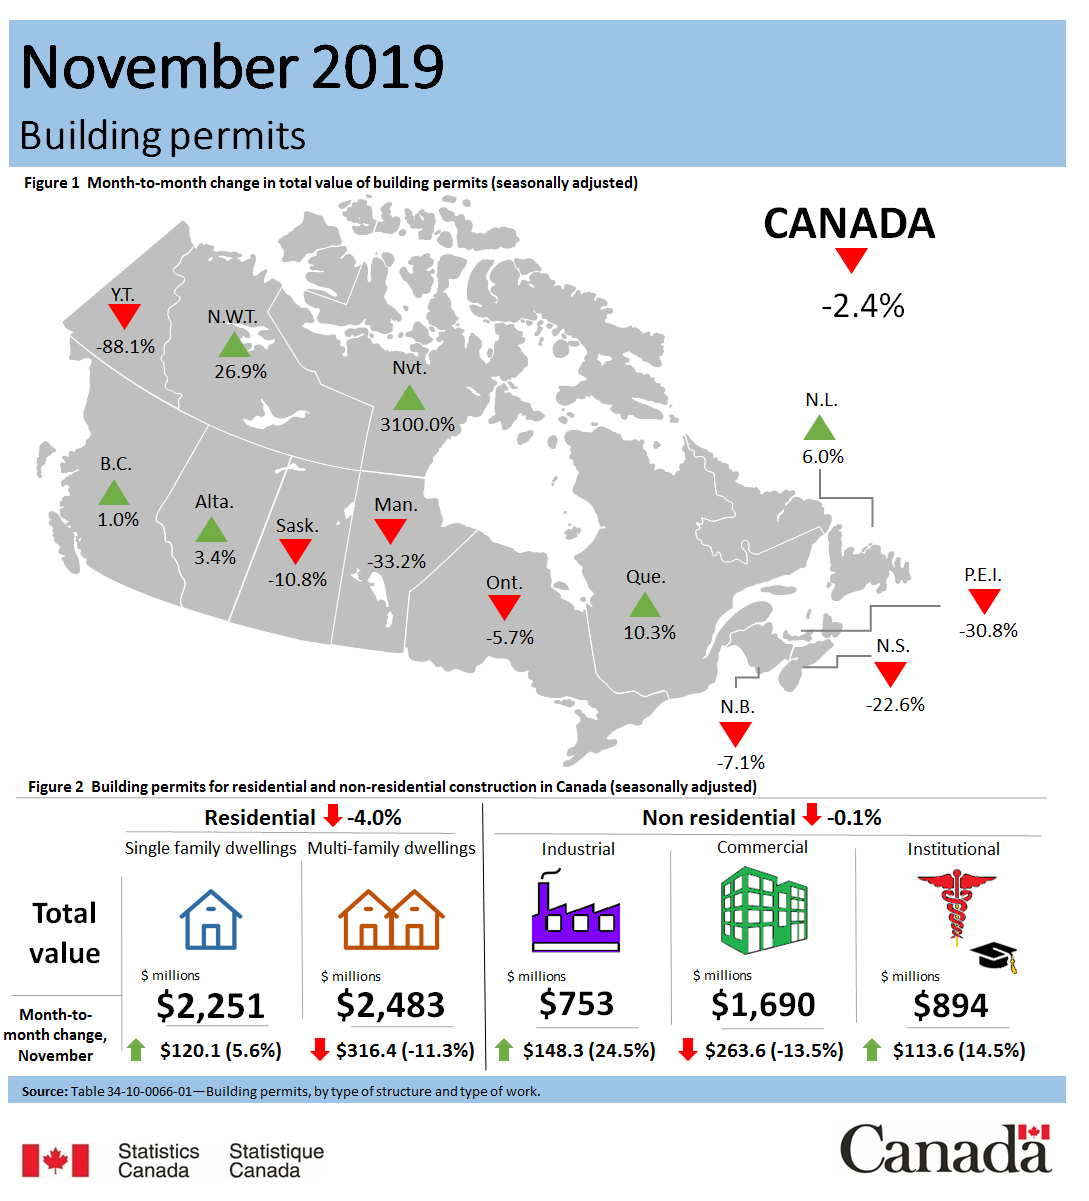 Thumbnail for Infographic 1: Building permits, November 2019